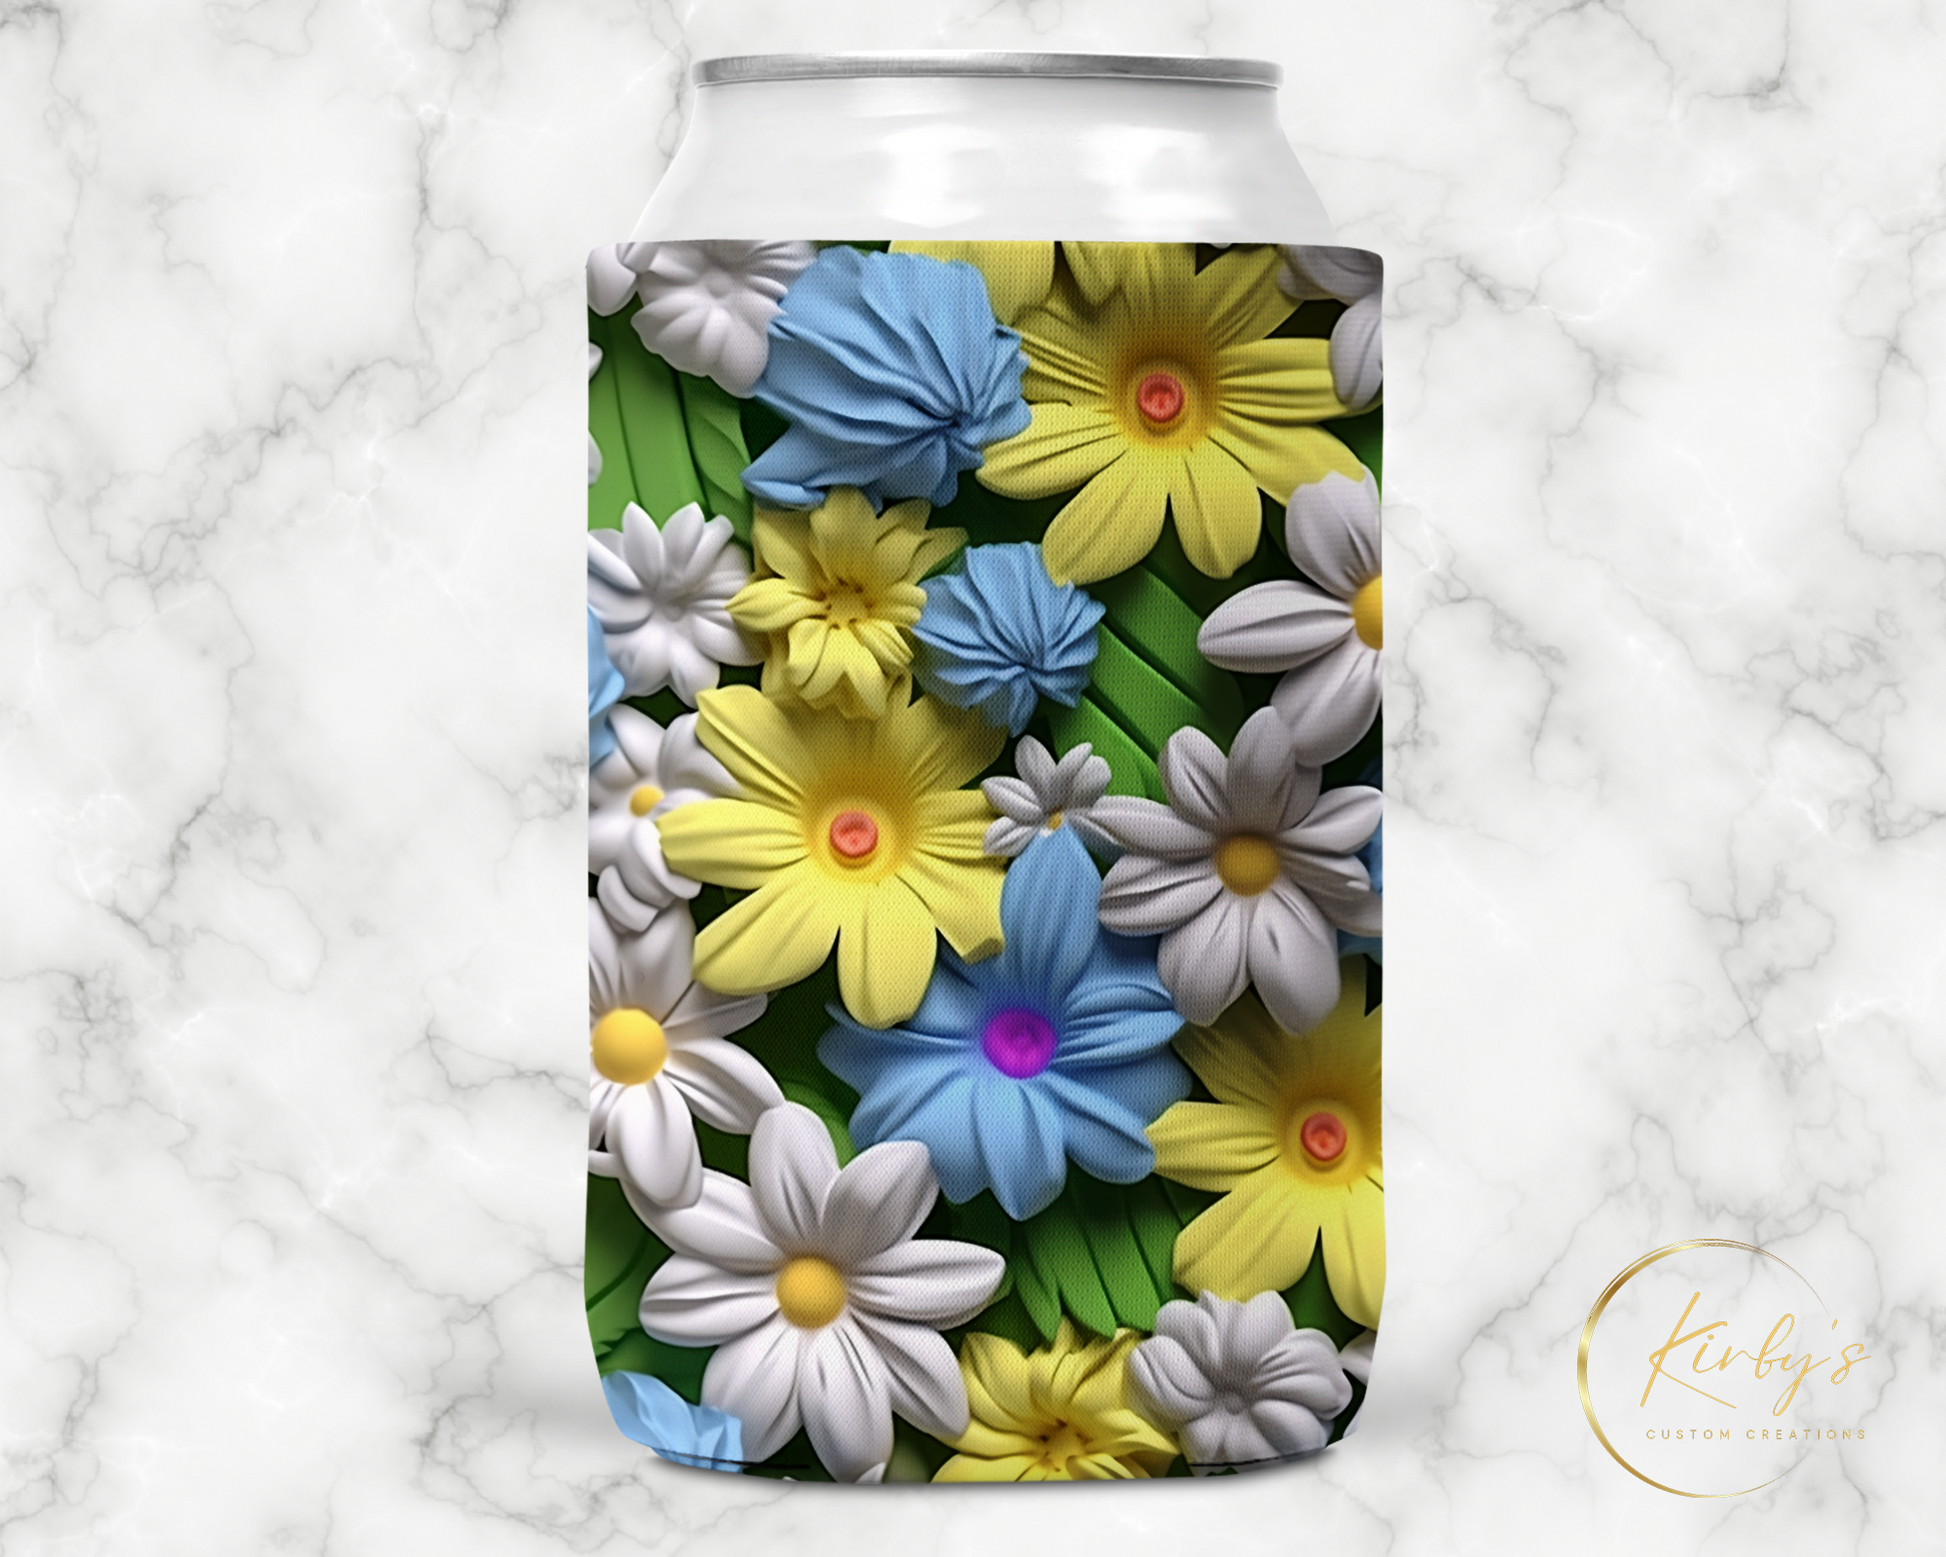 3D Floral Can Holder. Blue, White, and Yellow Flowers. Standard Soft Koozie